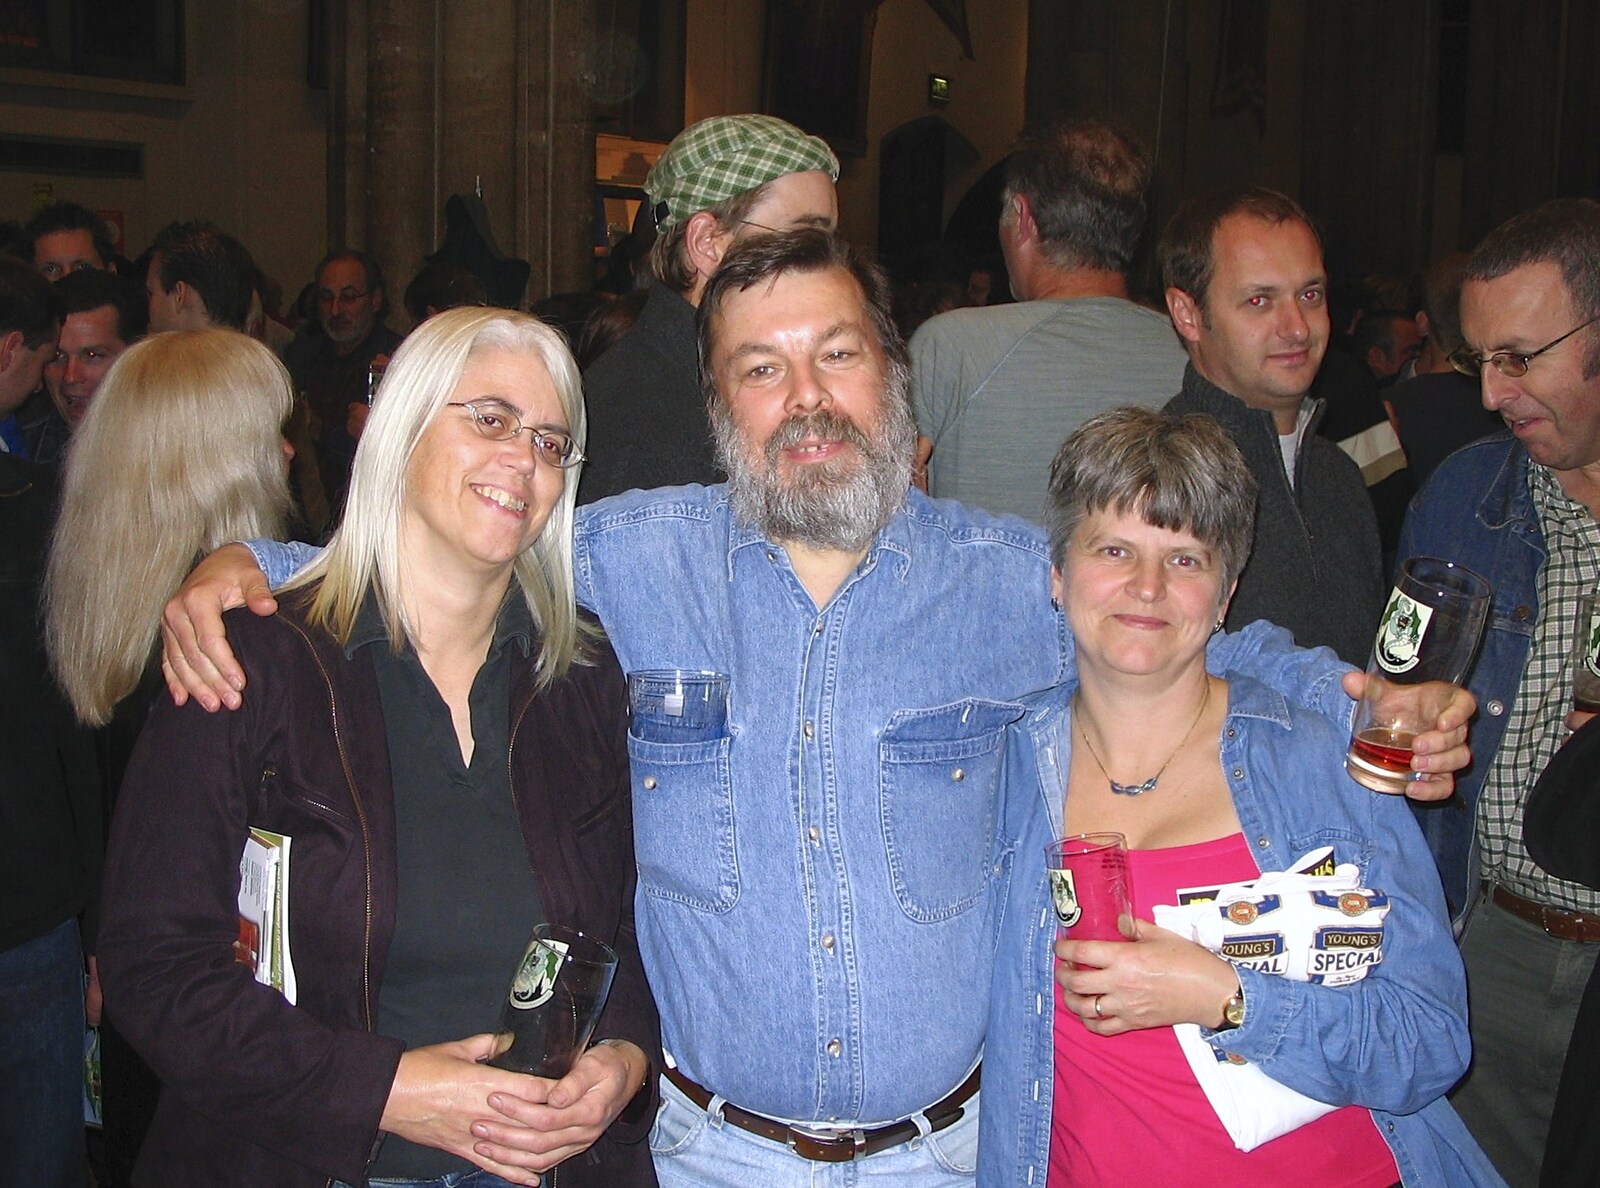 Carol, Benny and Gloria from The Norfolk and Norwich Beer Festival, St. Andrew's Hall, Norwich - 27th October 2004